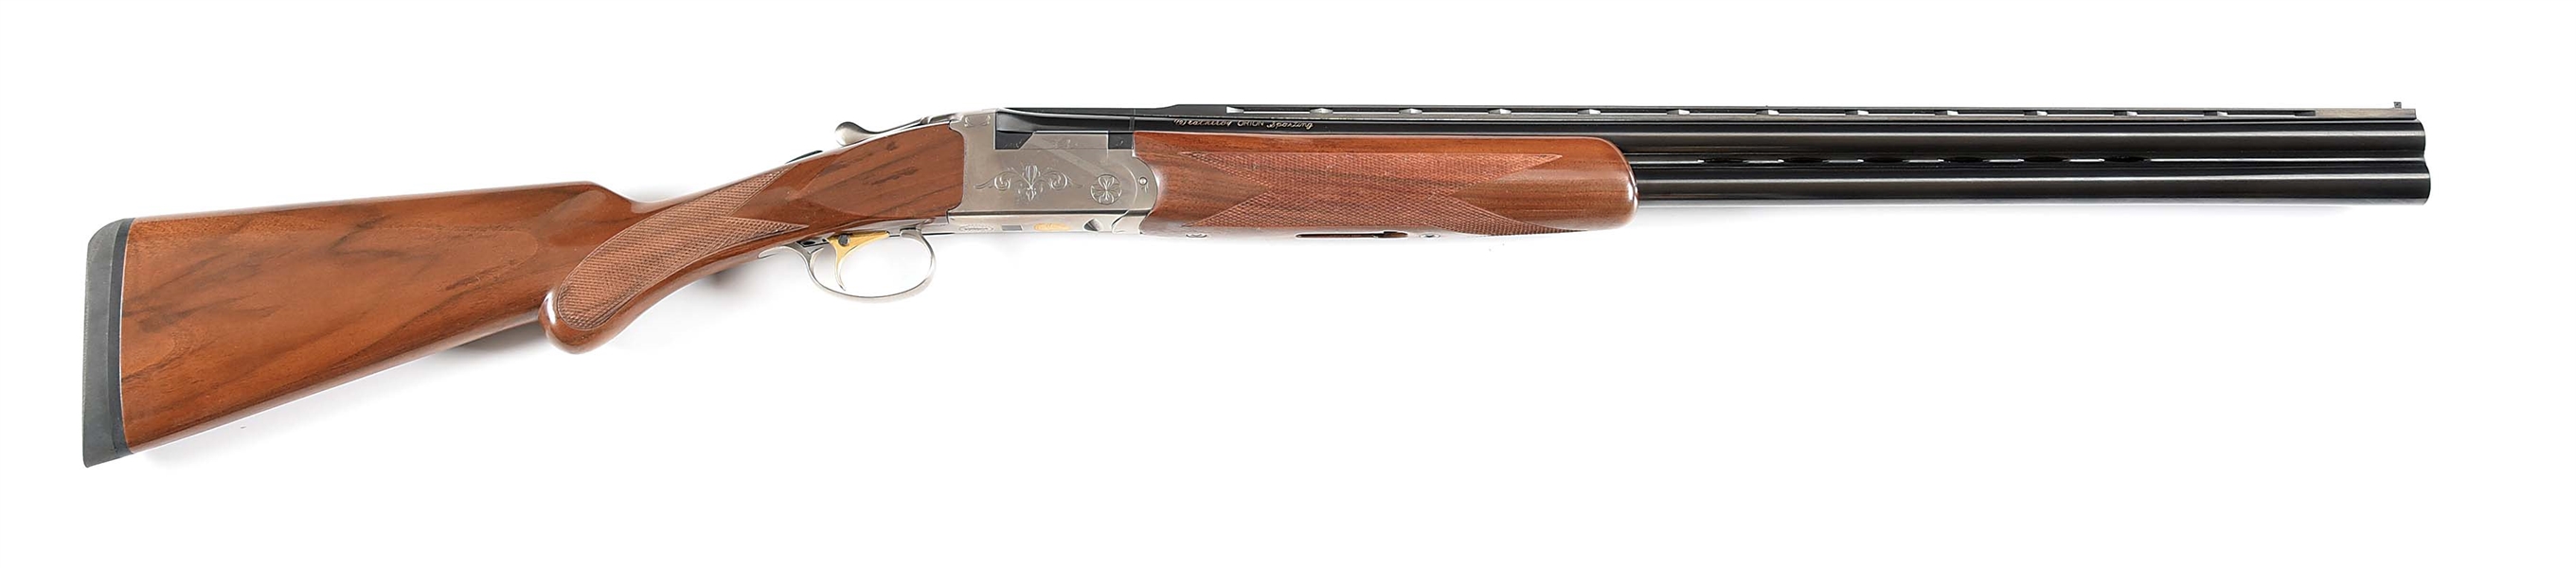 (M) WEATHERBY ORION II CLASSIC SPORTING CLAYS OVER-UNDER SHOTGUN.